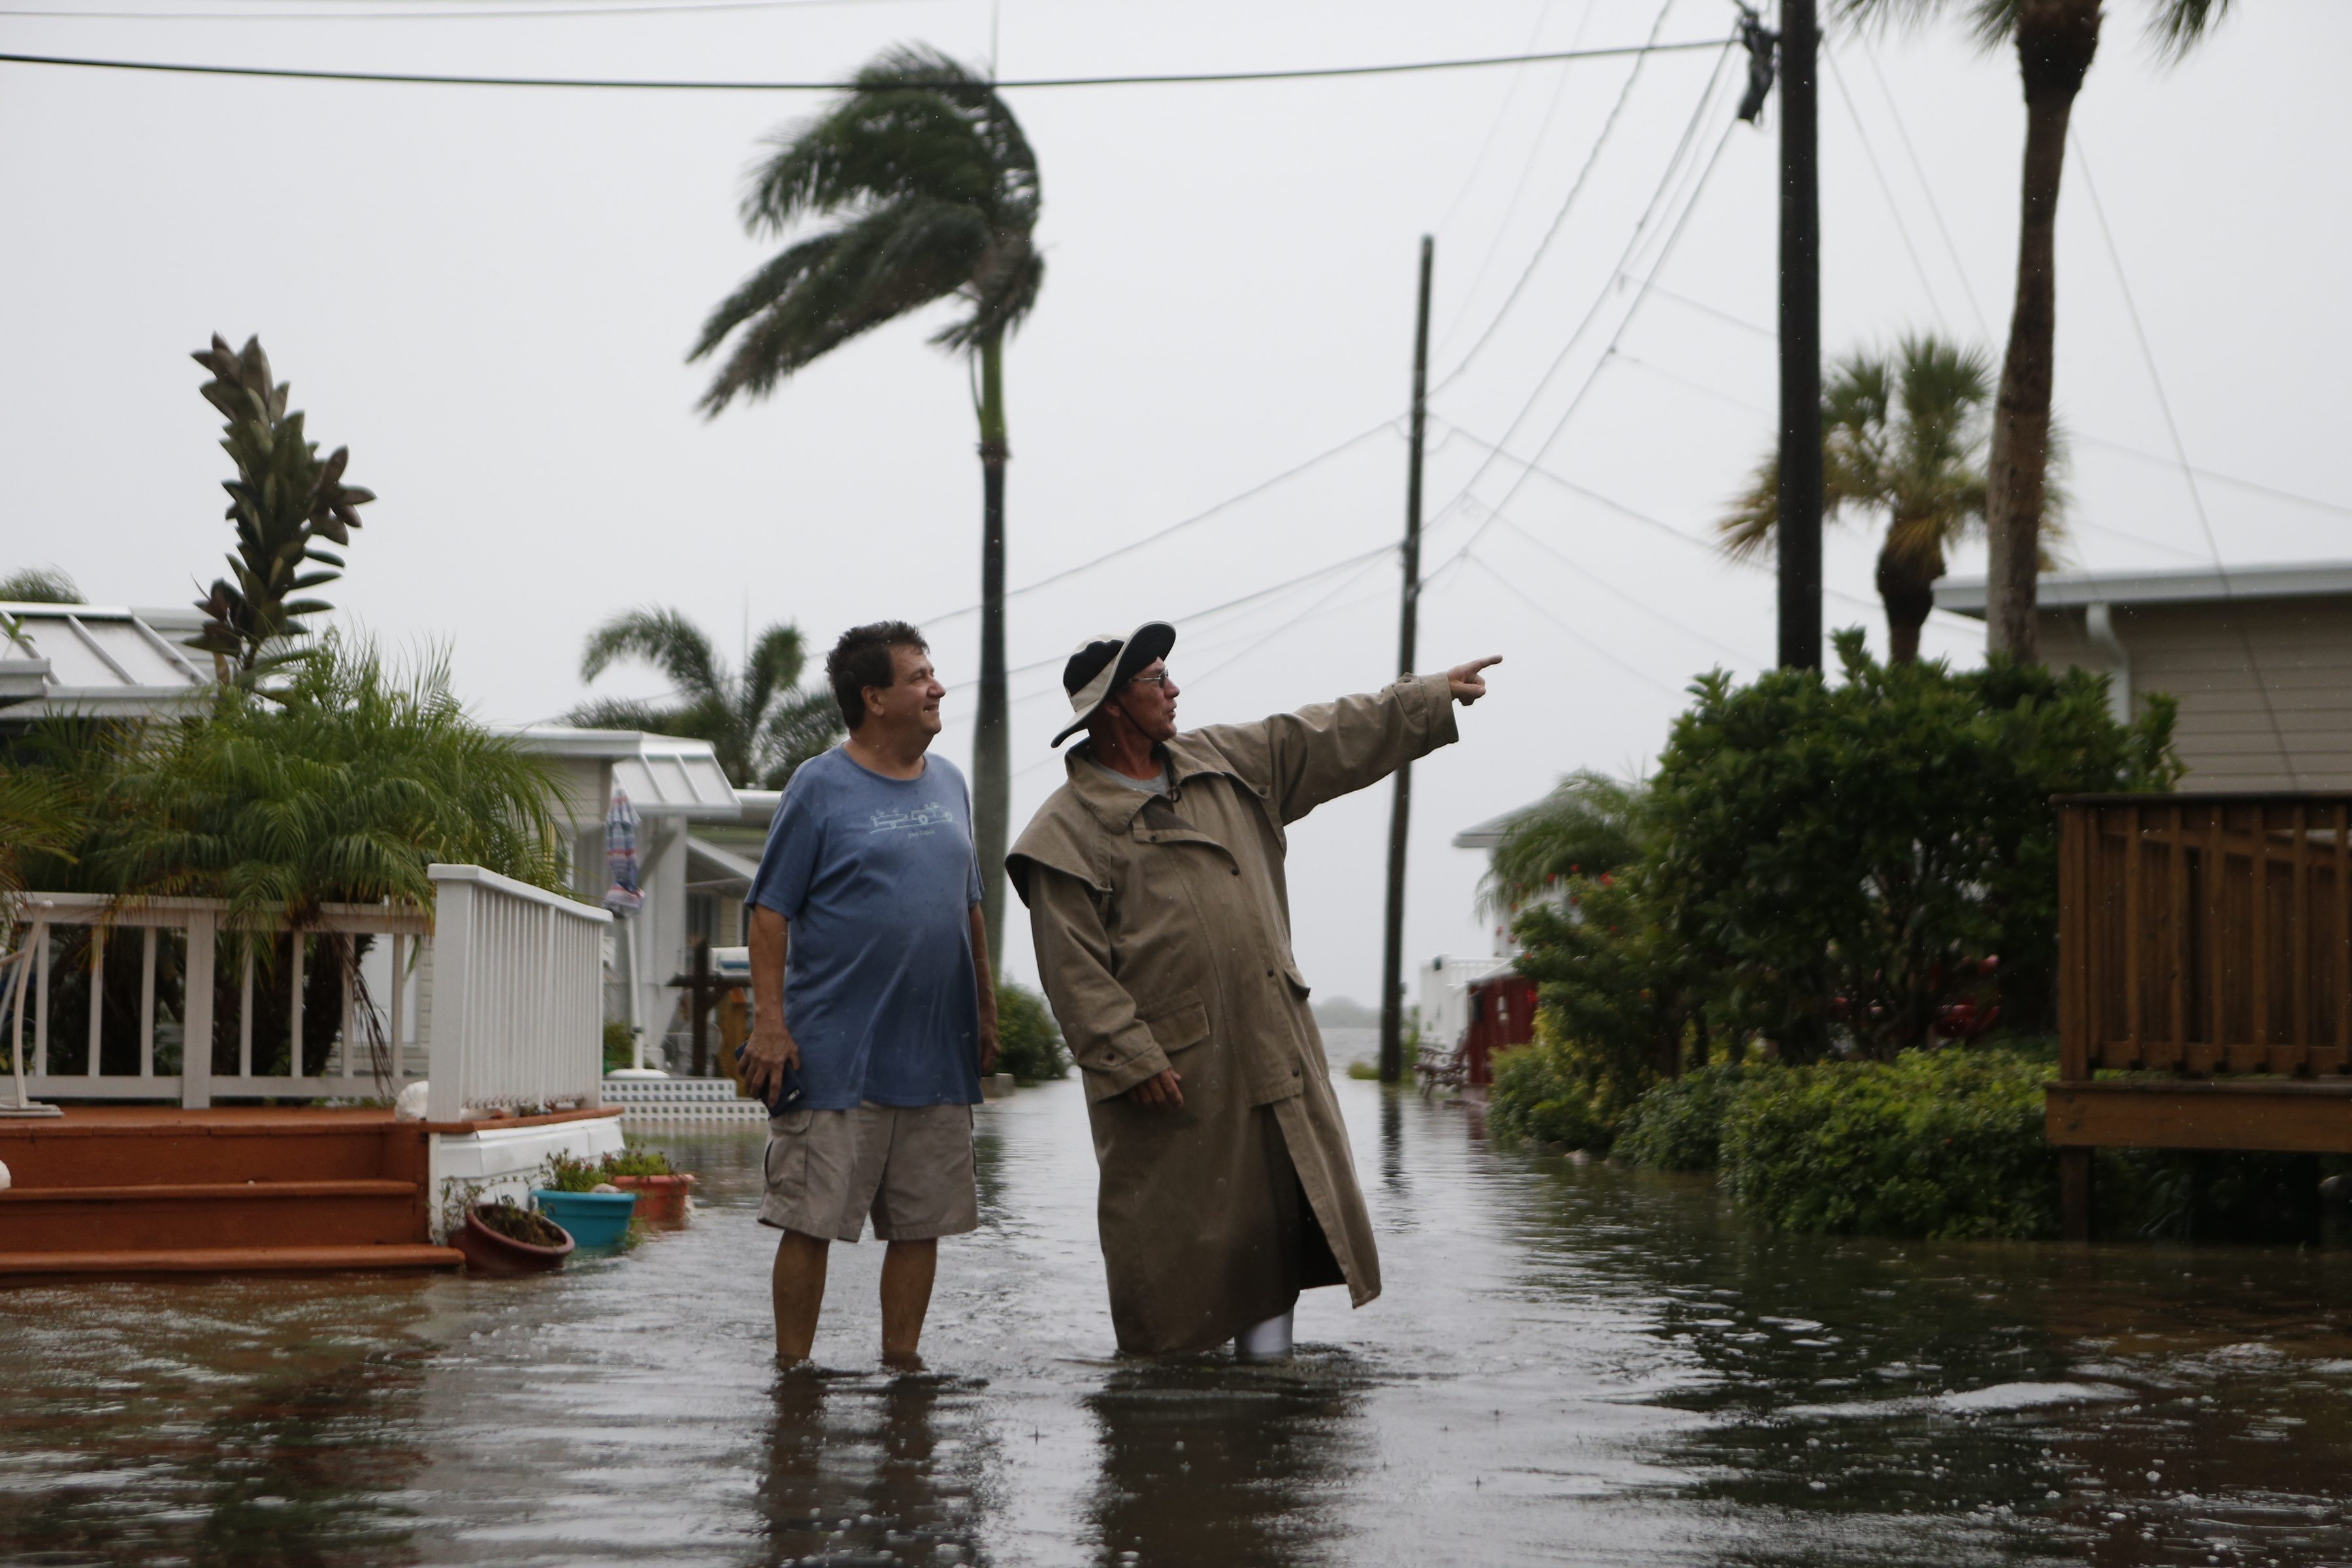 HOLMES BEACH, FL - SEPTEMBER 1: Residents of the Sandpiper Resort survey the rising water coming from the Gulf of Mexico into their neighborhood as winds and storm surge associated with Tropical Storm Hermine impact the area on September 1, 2016 at in Holmes Beach, Florida. Hurricane warnings have been issued for parts of Florida's Gulf Coast as Hermine is expected to make landfall as a Category 1 hurricane.